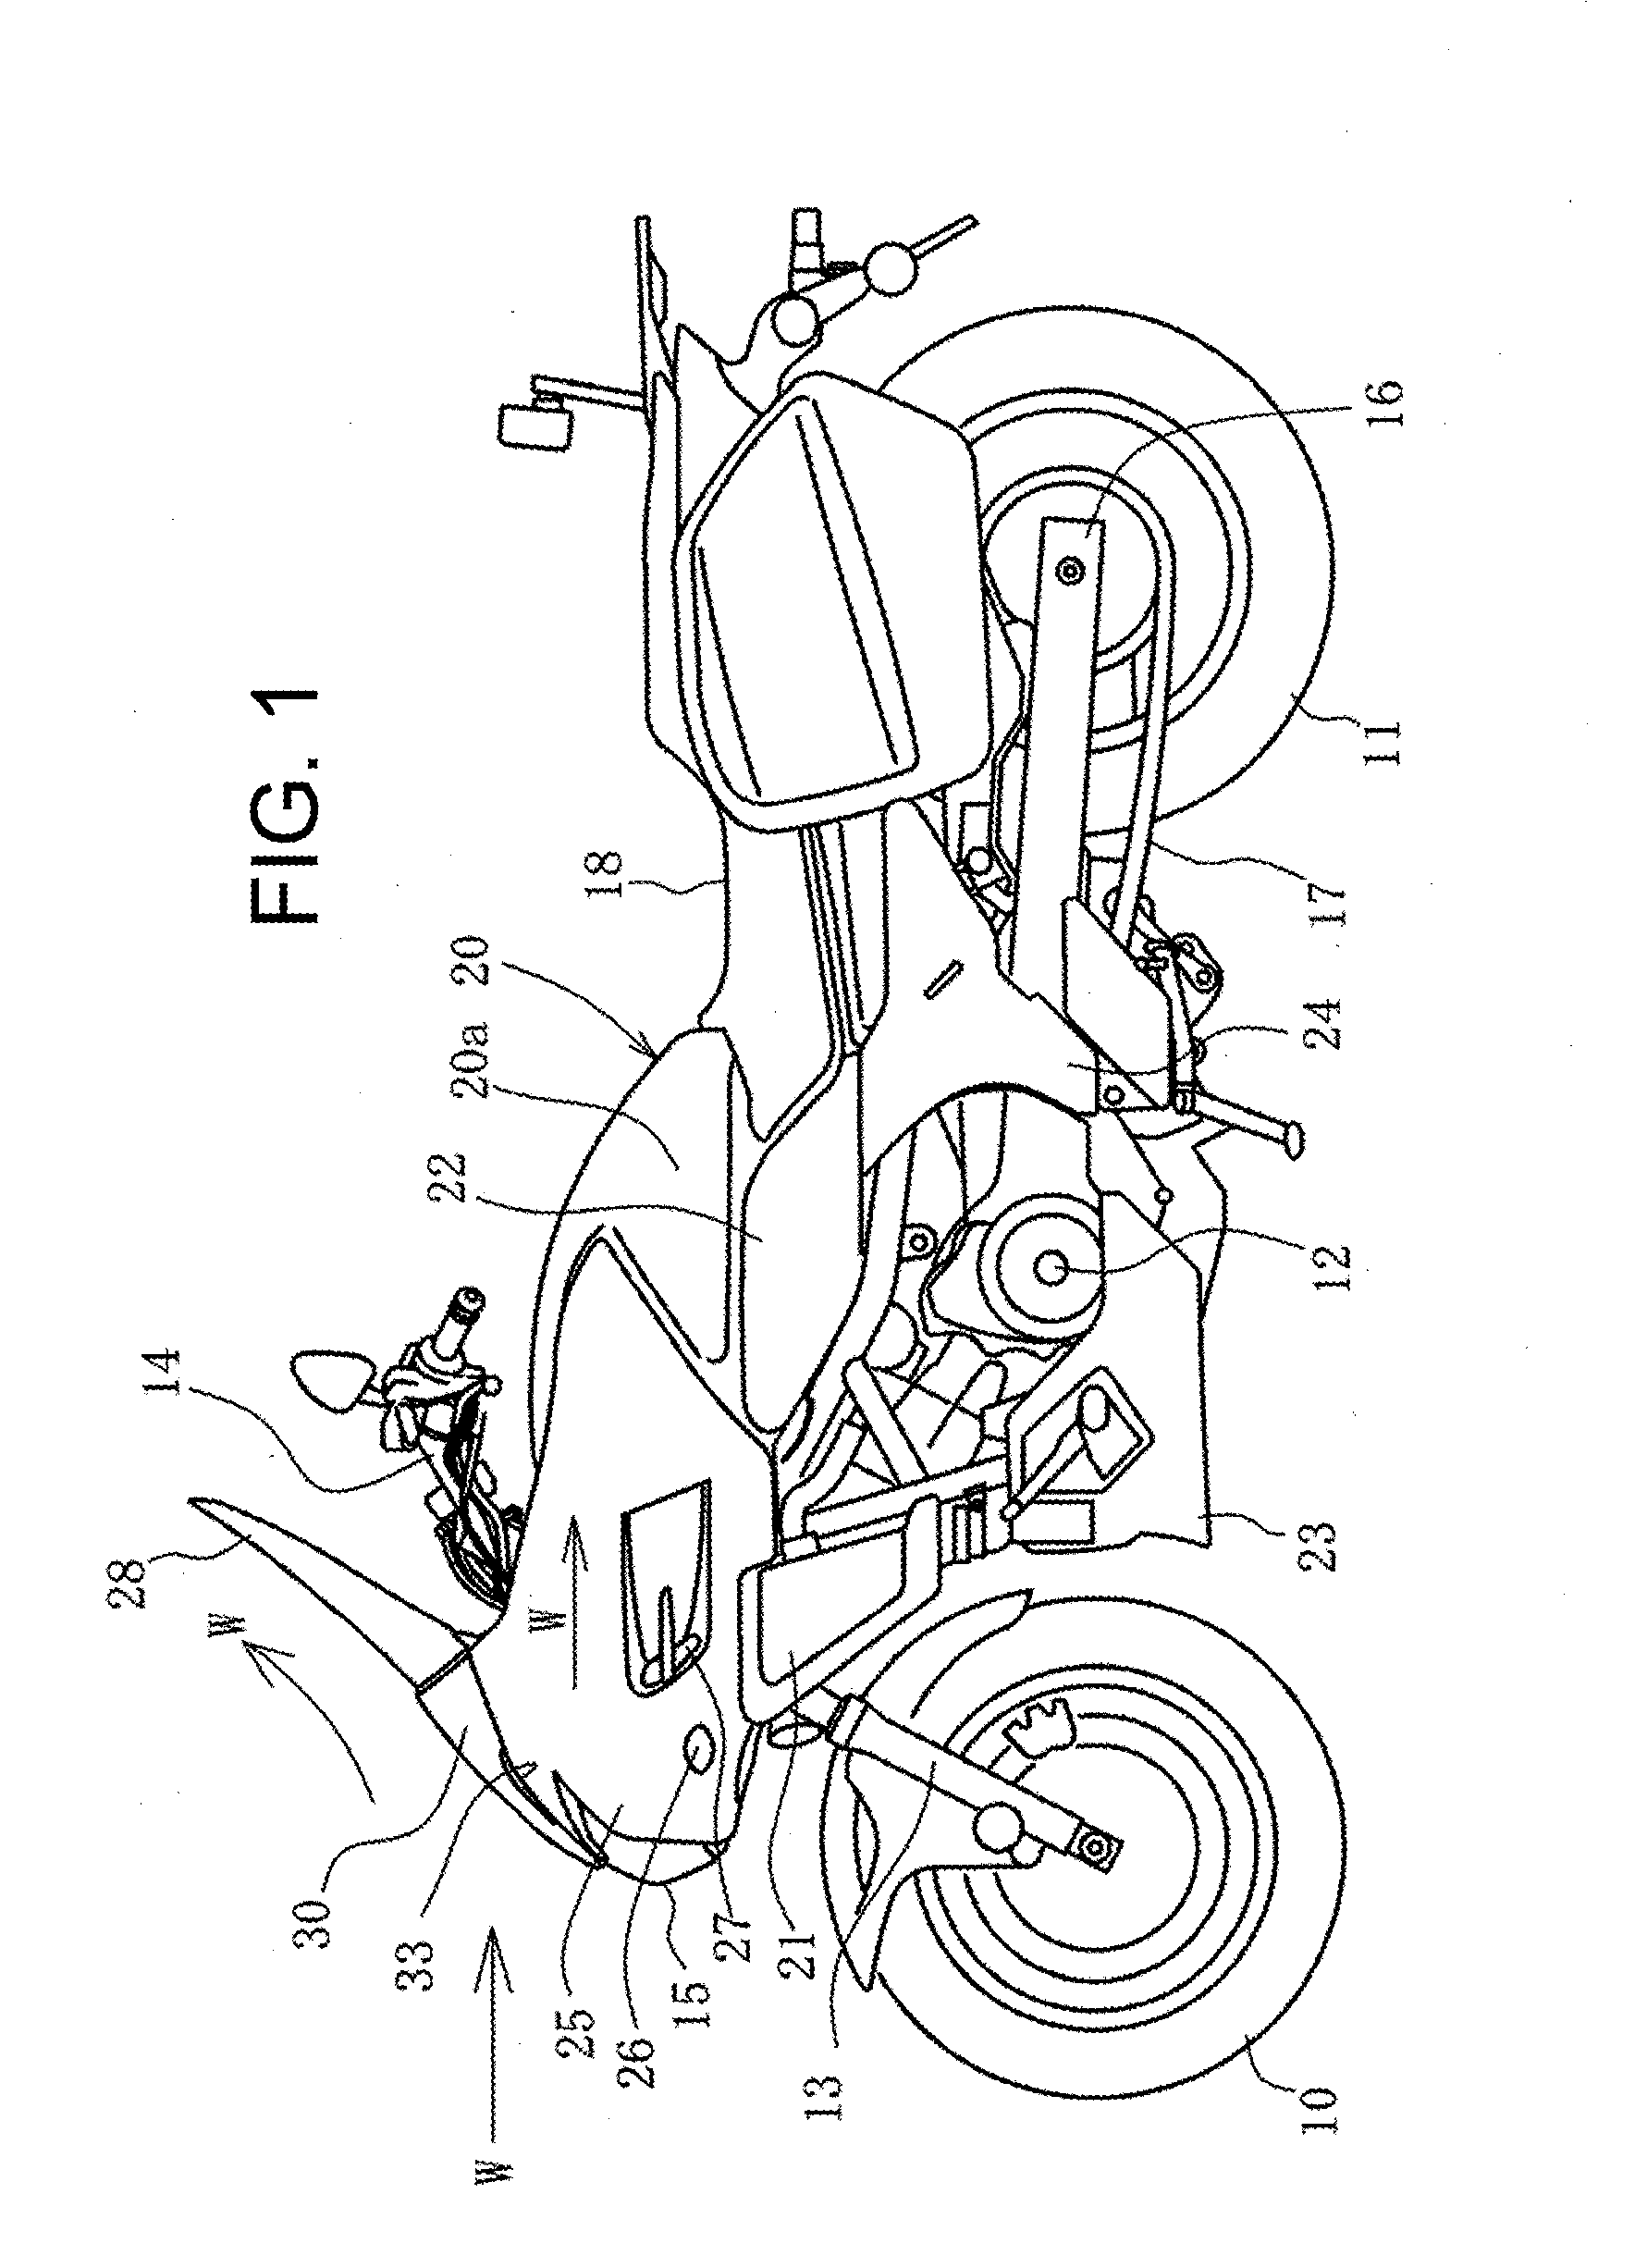 Vehicle with windscreen